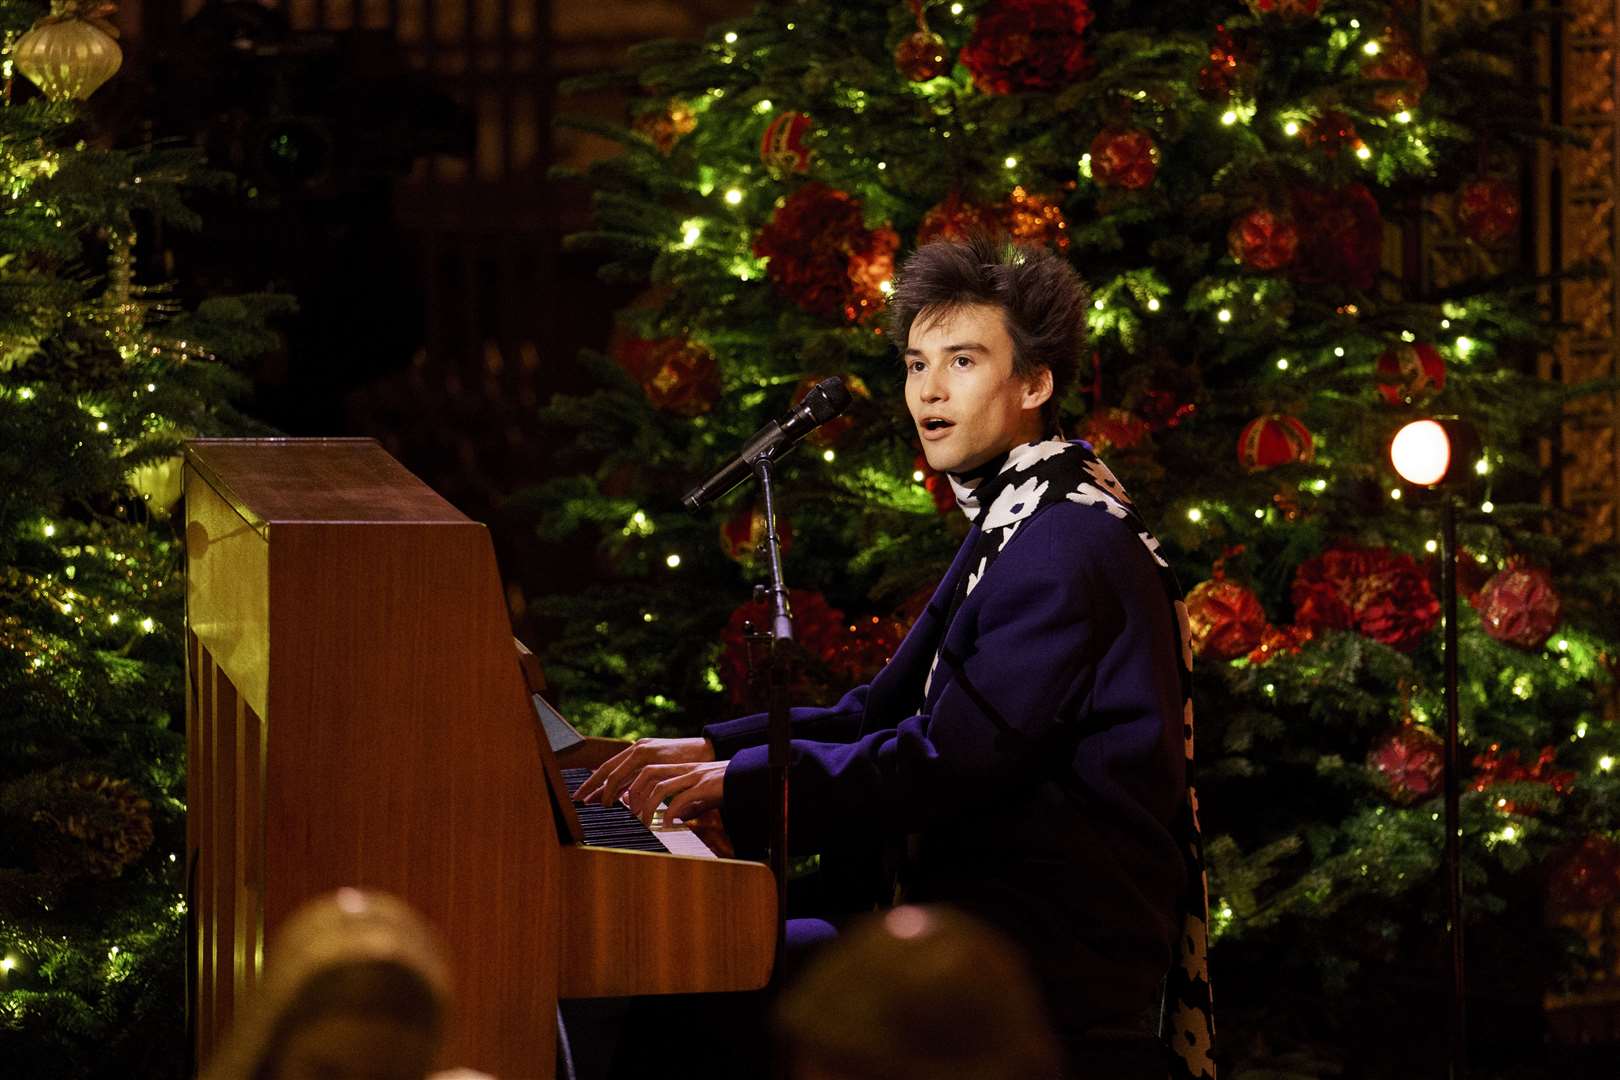 Jacob Collier performs during the Royal Carols – Together At Christmas service at Westminster Abbey on John Lennon’s former piano (Jordan Pettitt/PA)